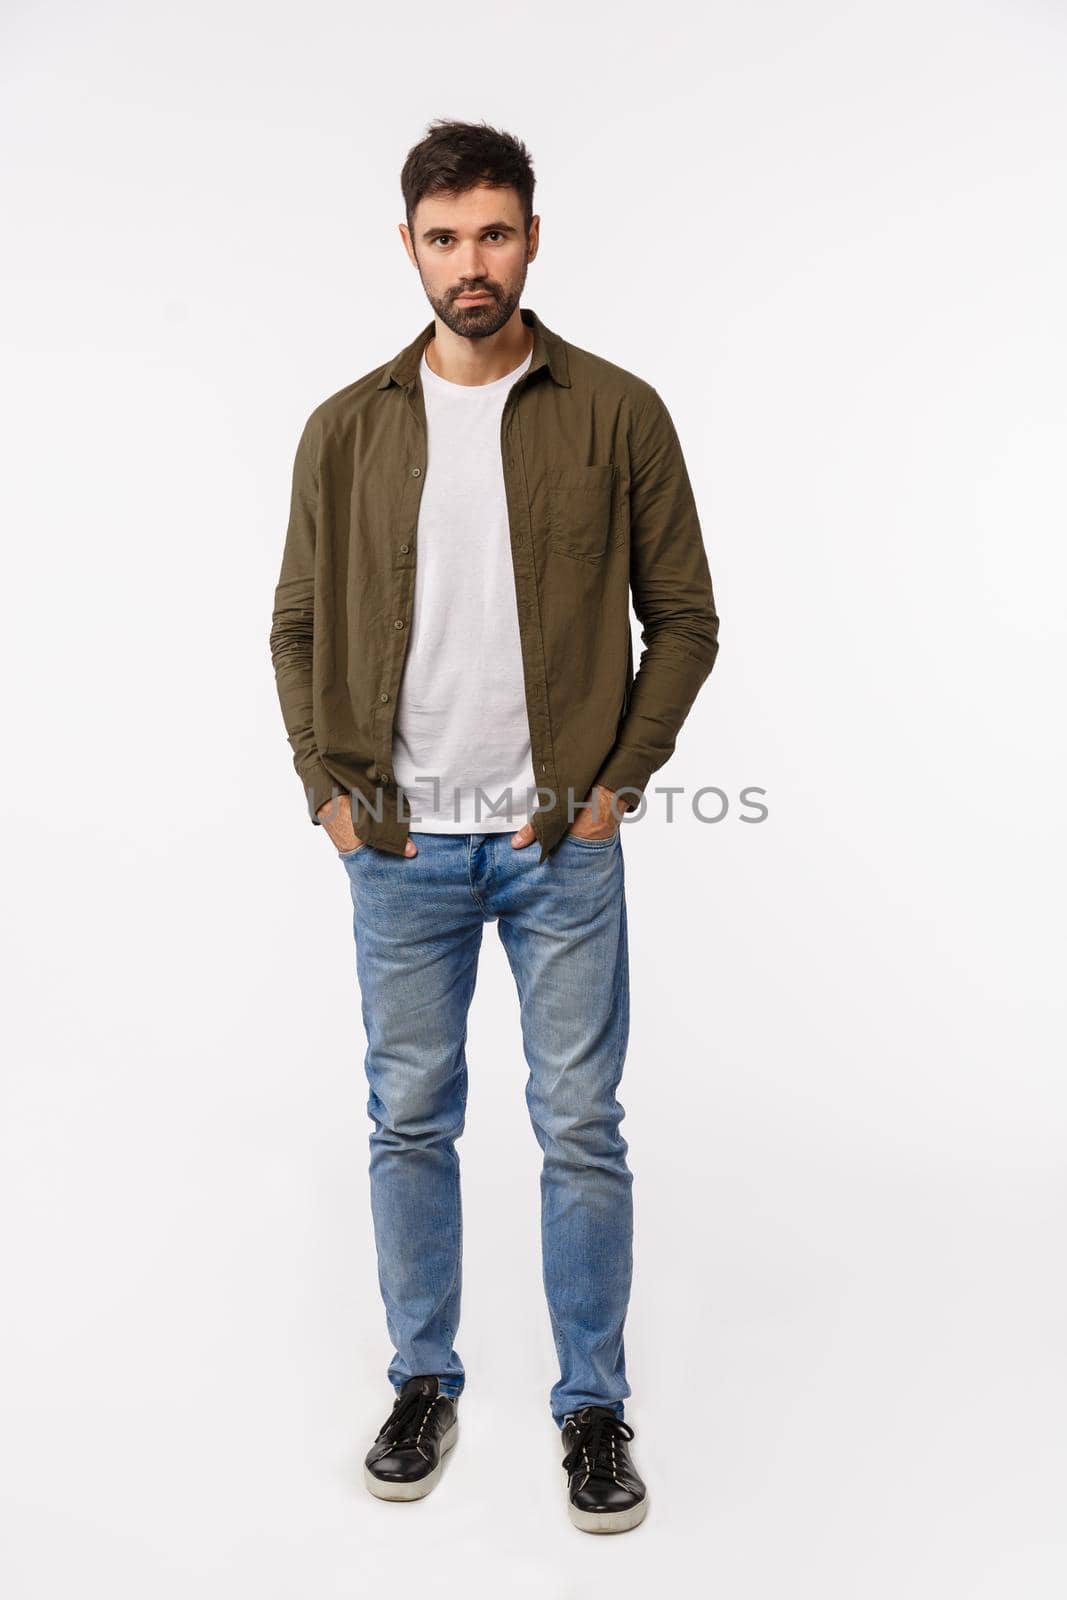 Vertical full-length shot sassy and confident modern man in coat, jeans streetstyle outfit, holding hands in pockets, looking assertive, smiling, getting ready business appointment, white background.